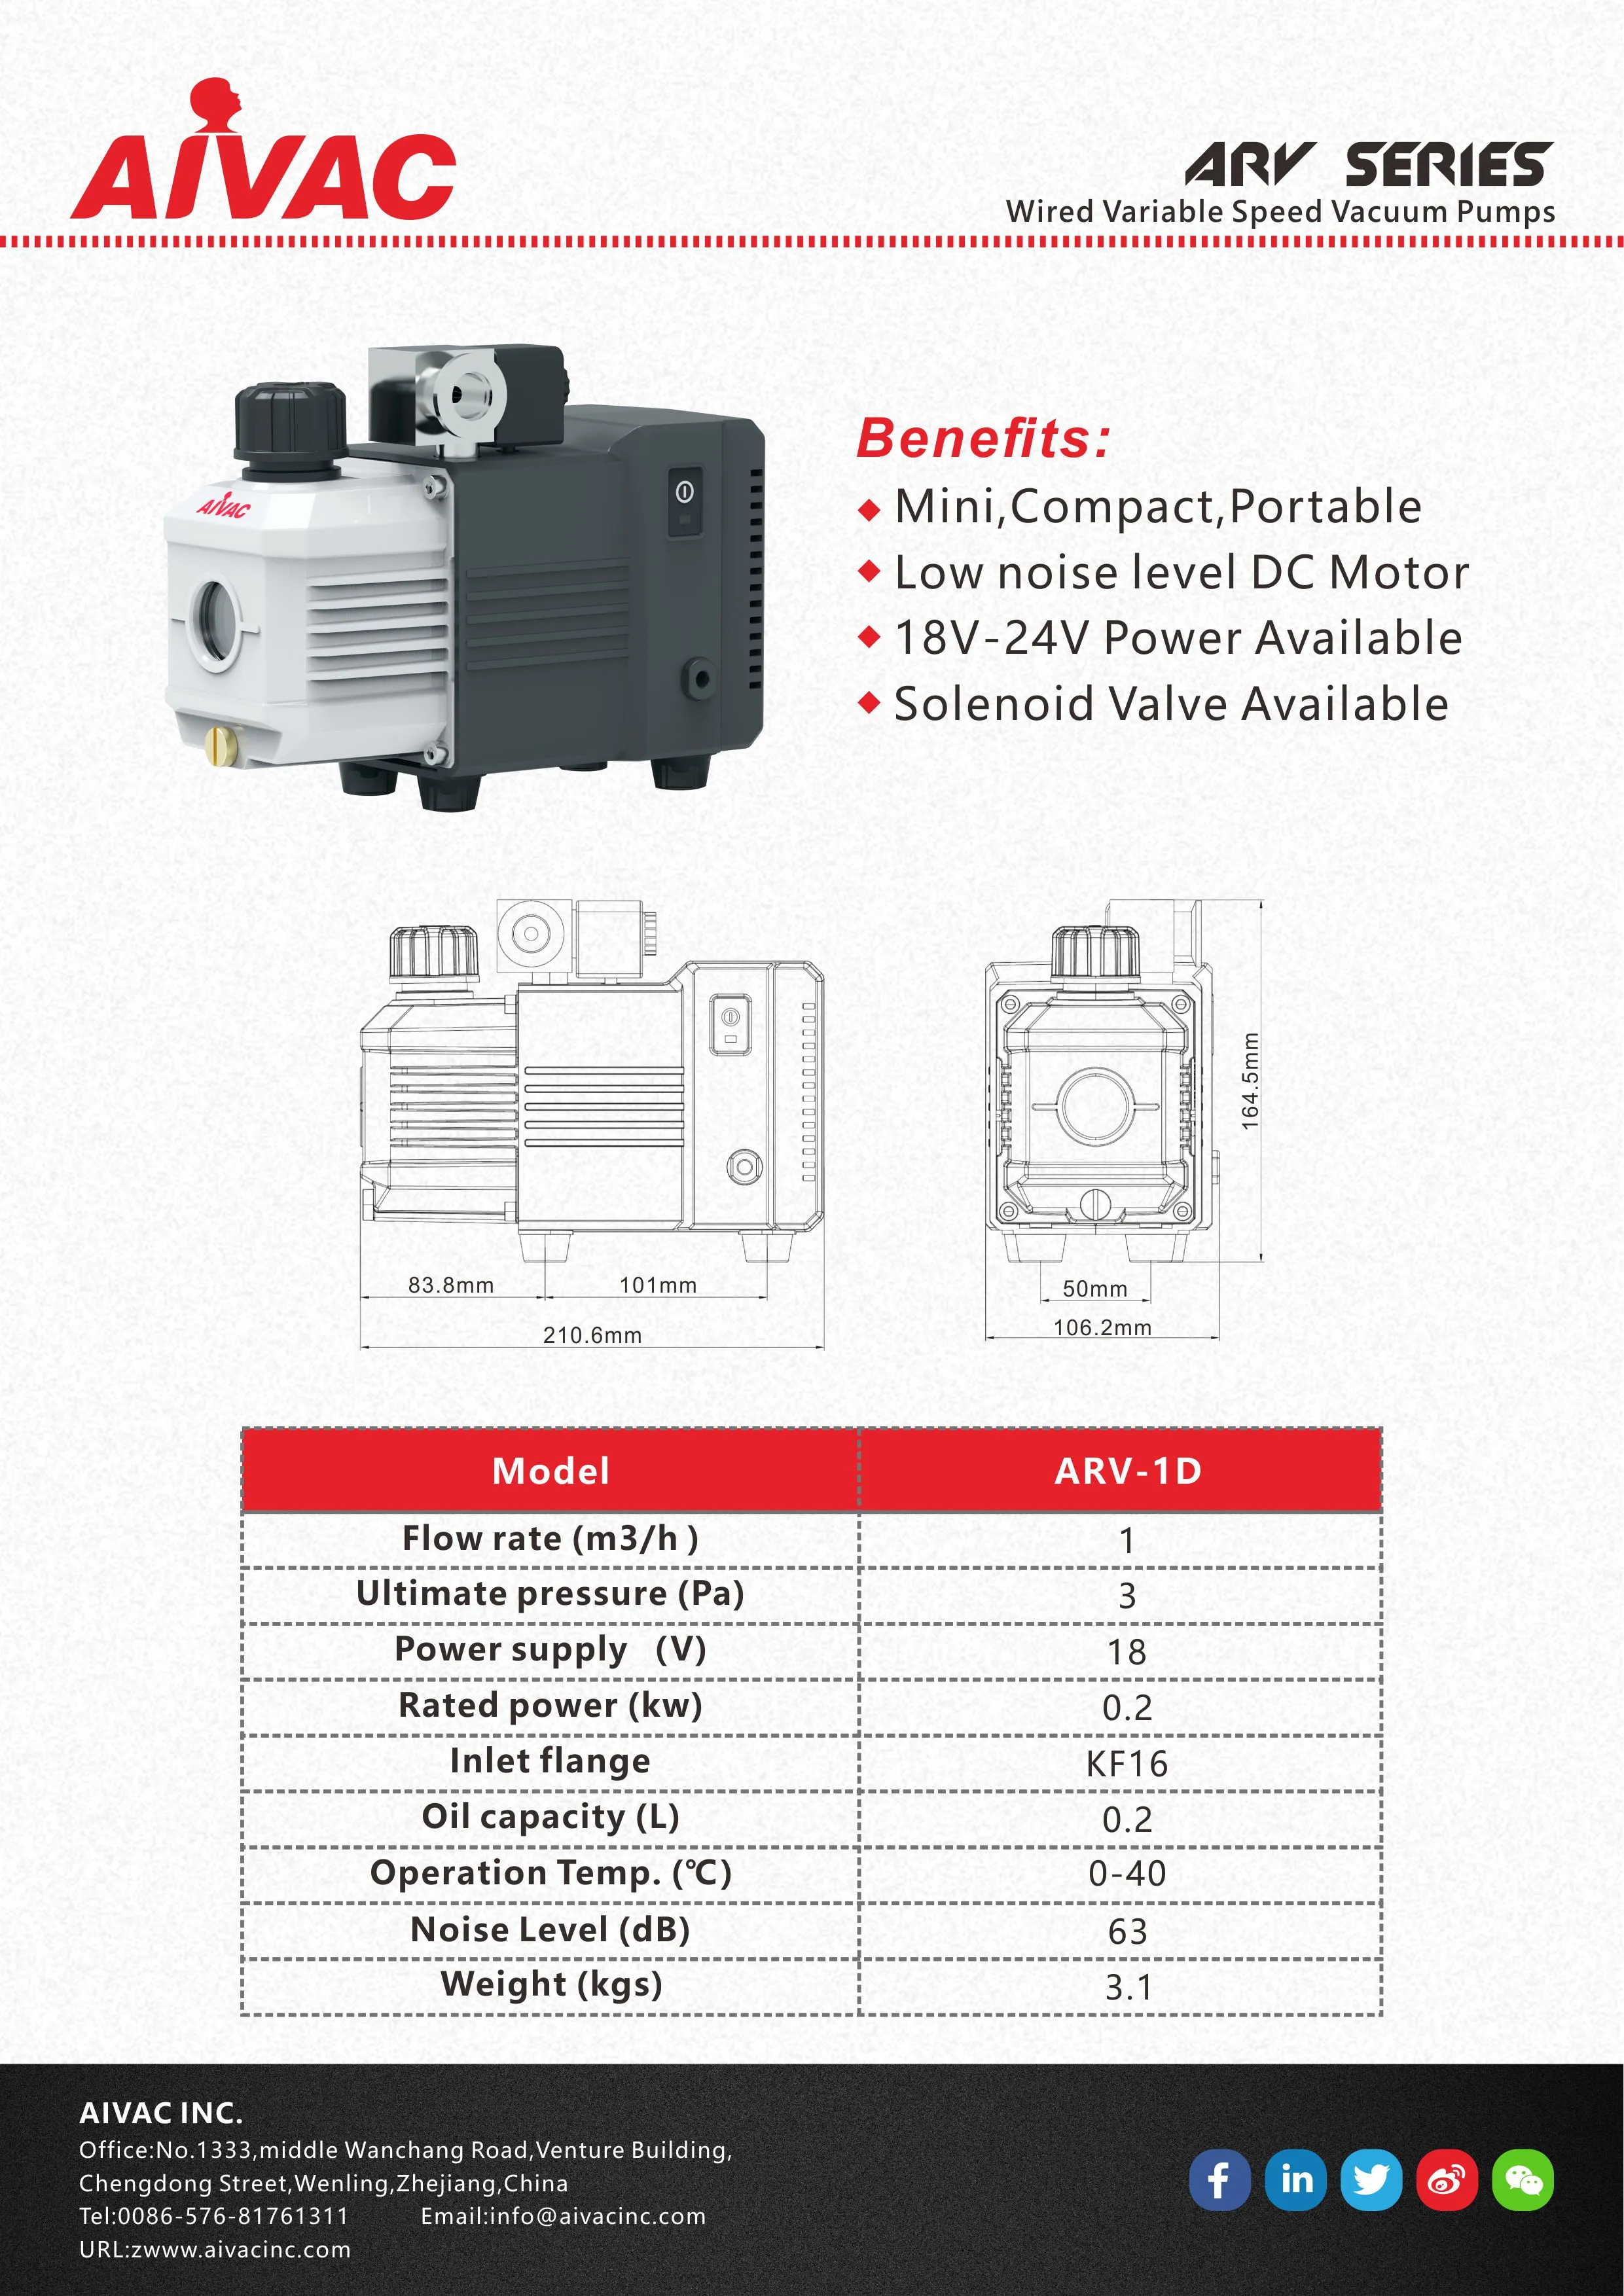 Wired Variable Speed Vacuum Pumps